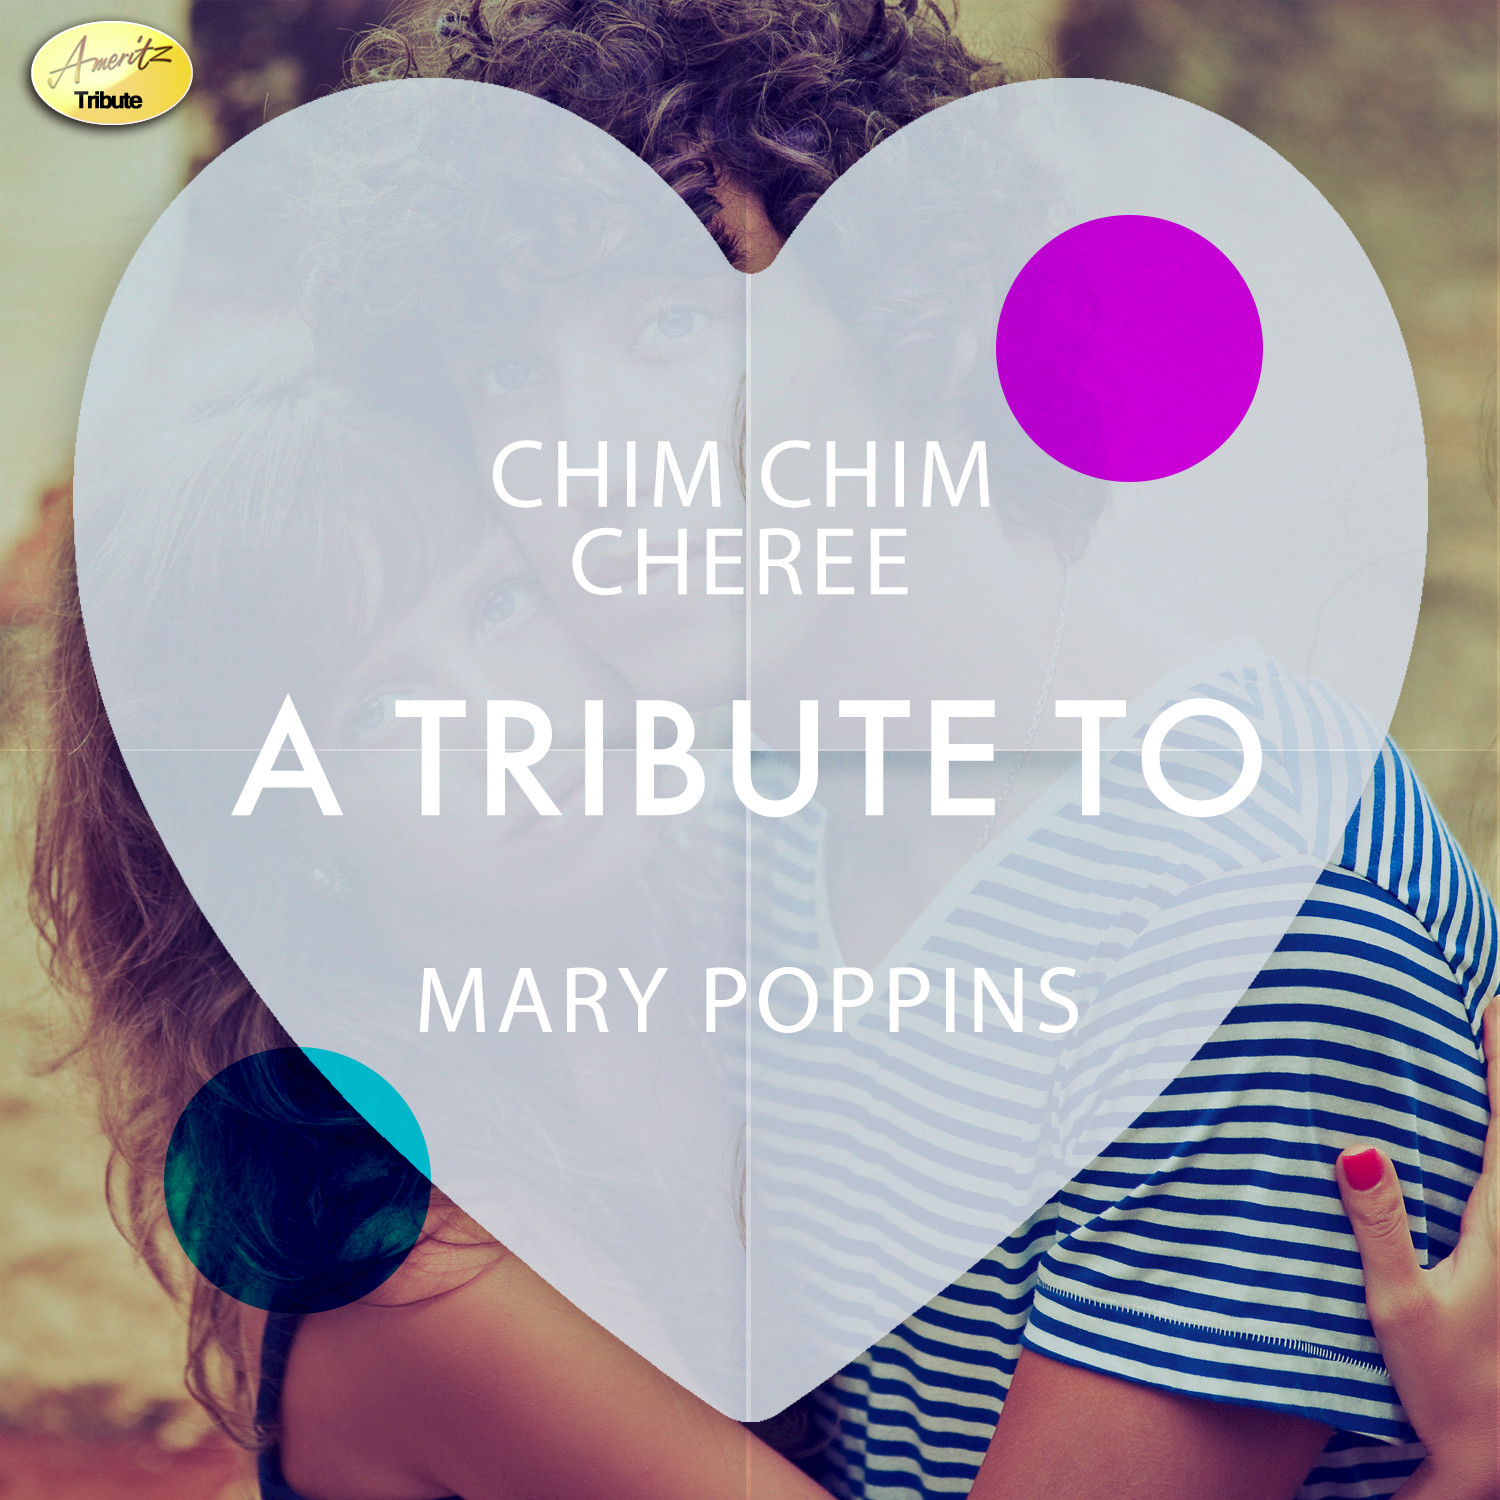 Chim Chim Cher-ee - A Tribute to Mary Poppins Soundtrack